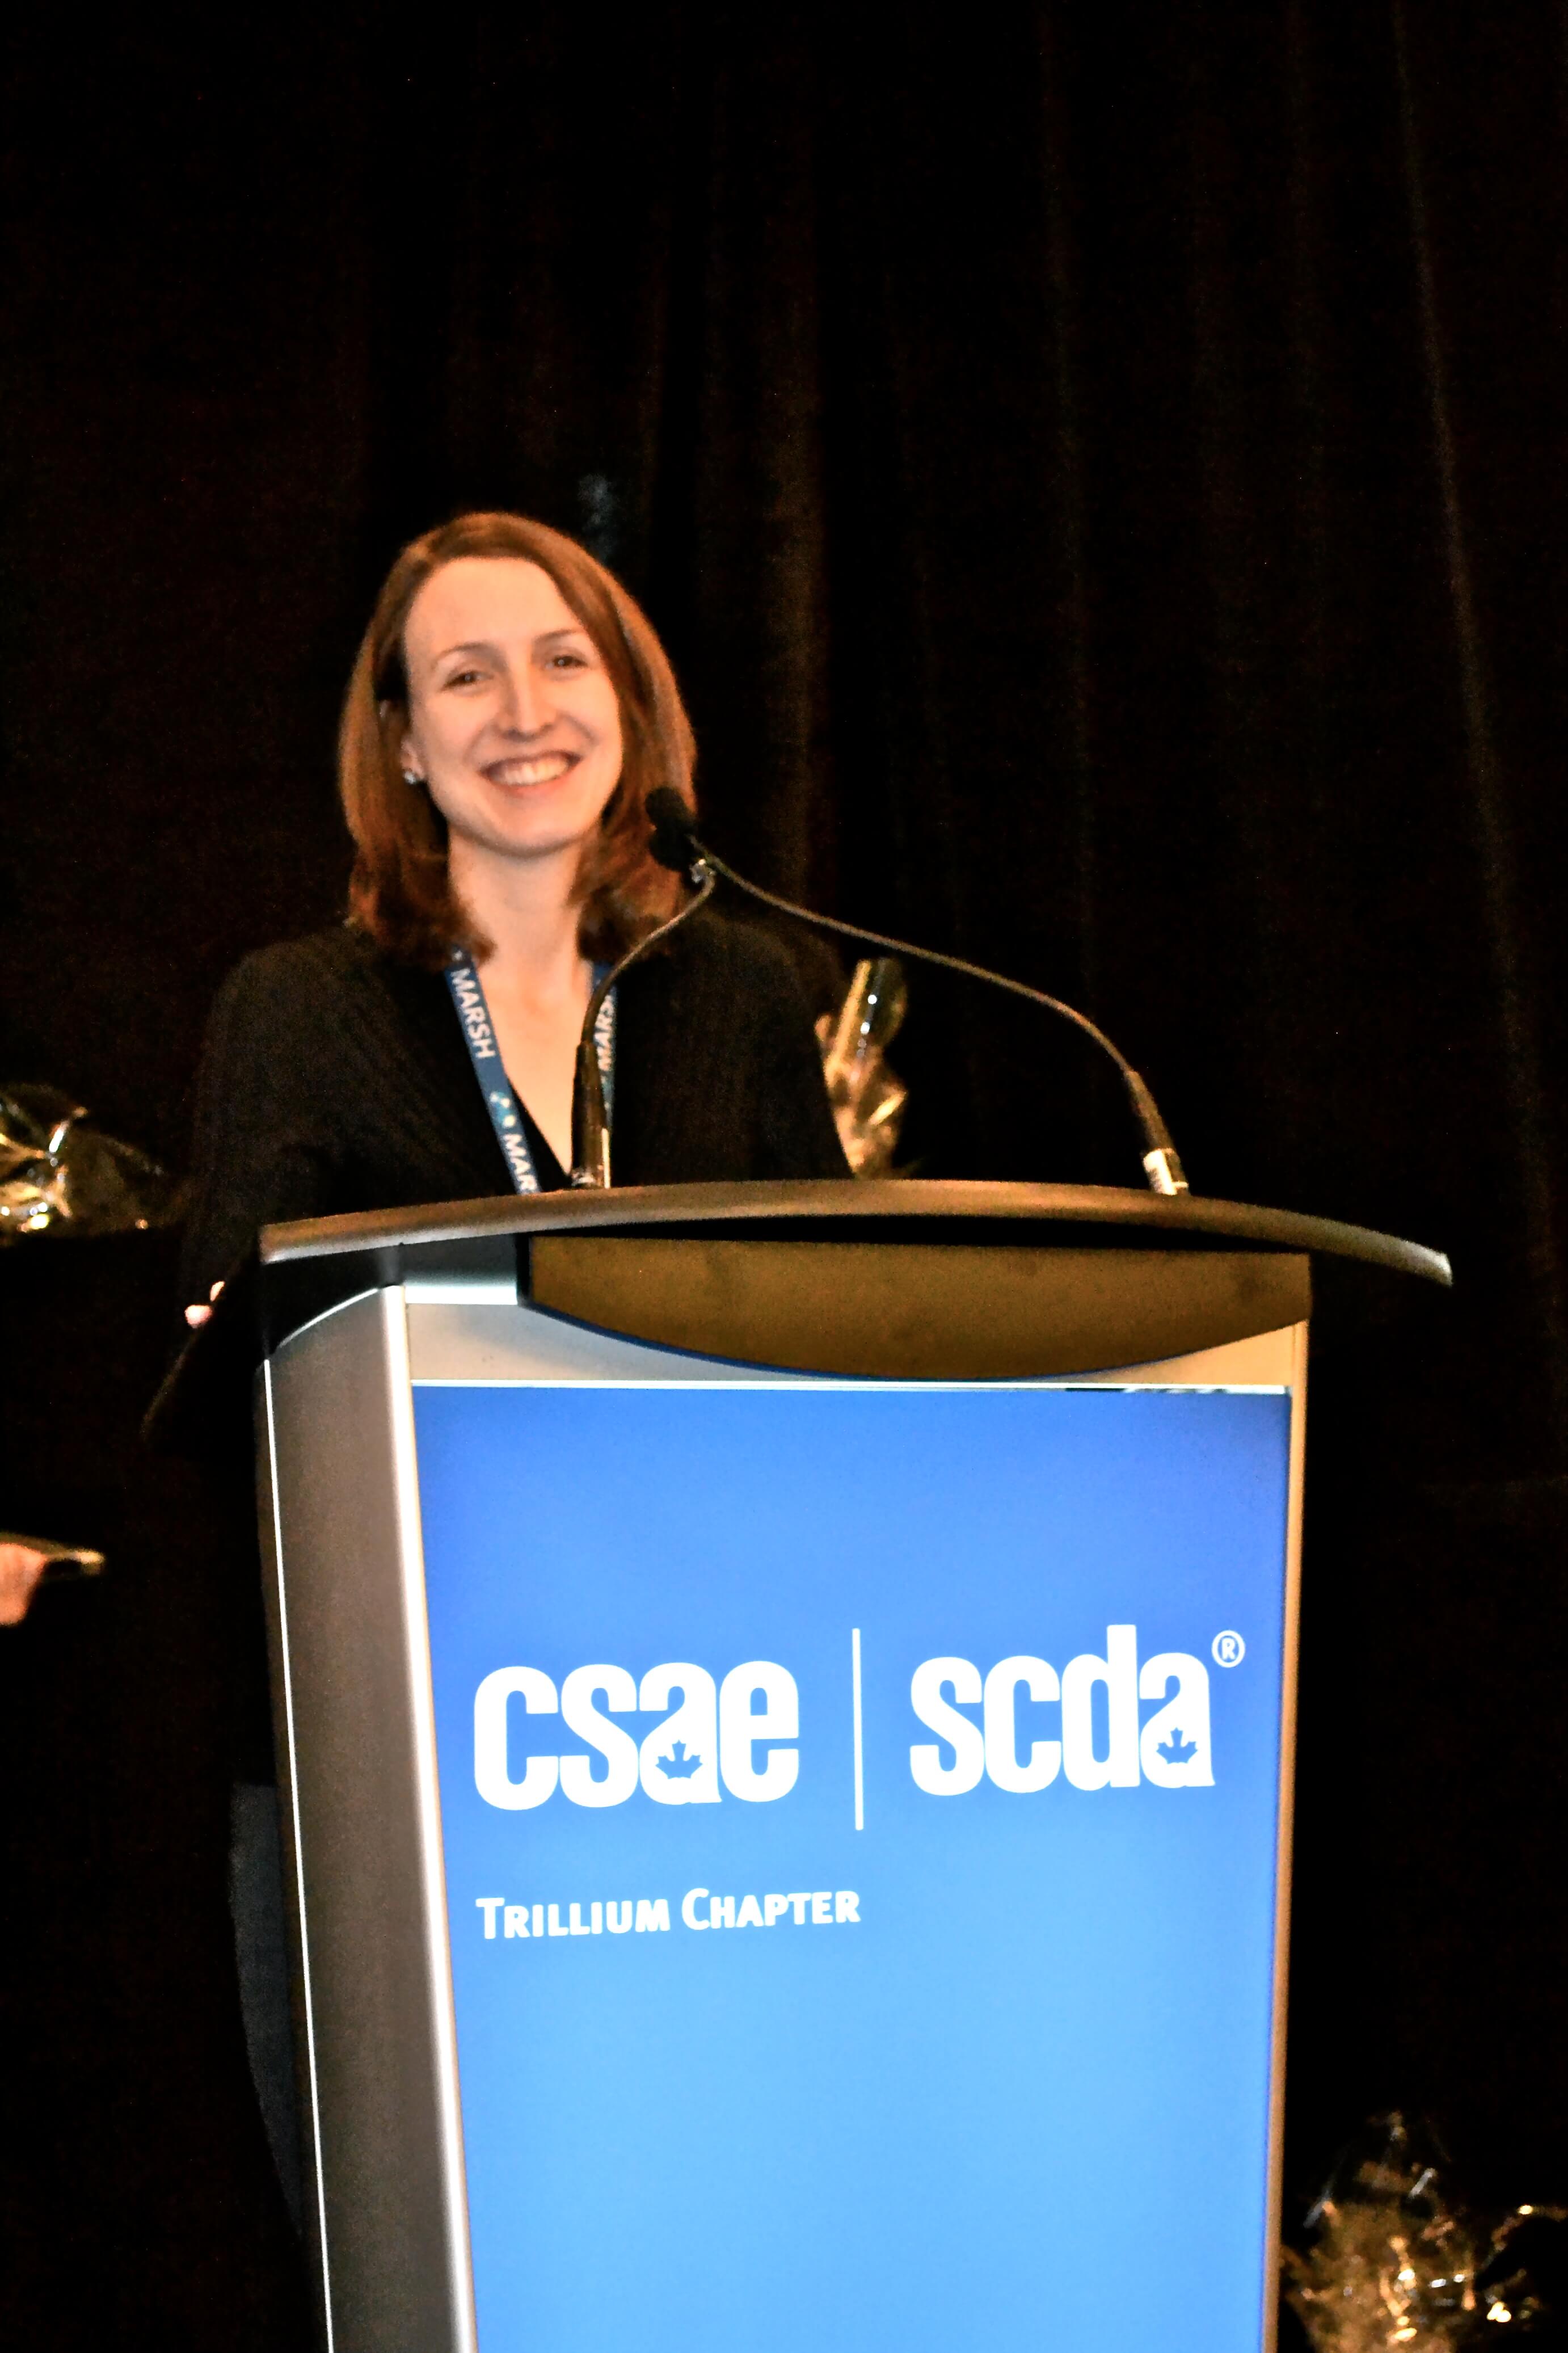 Laura Sellors at the CSAW podium discussing C ( Group's development of a website strategy